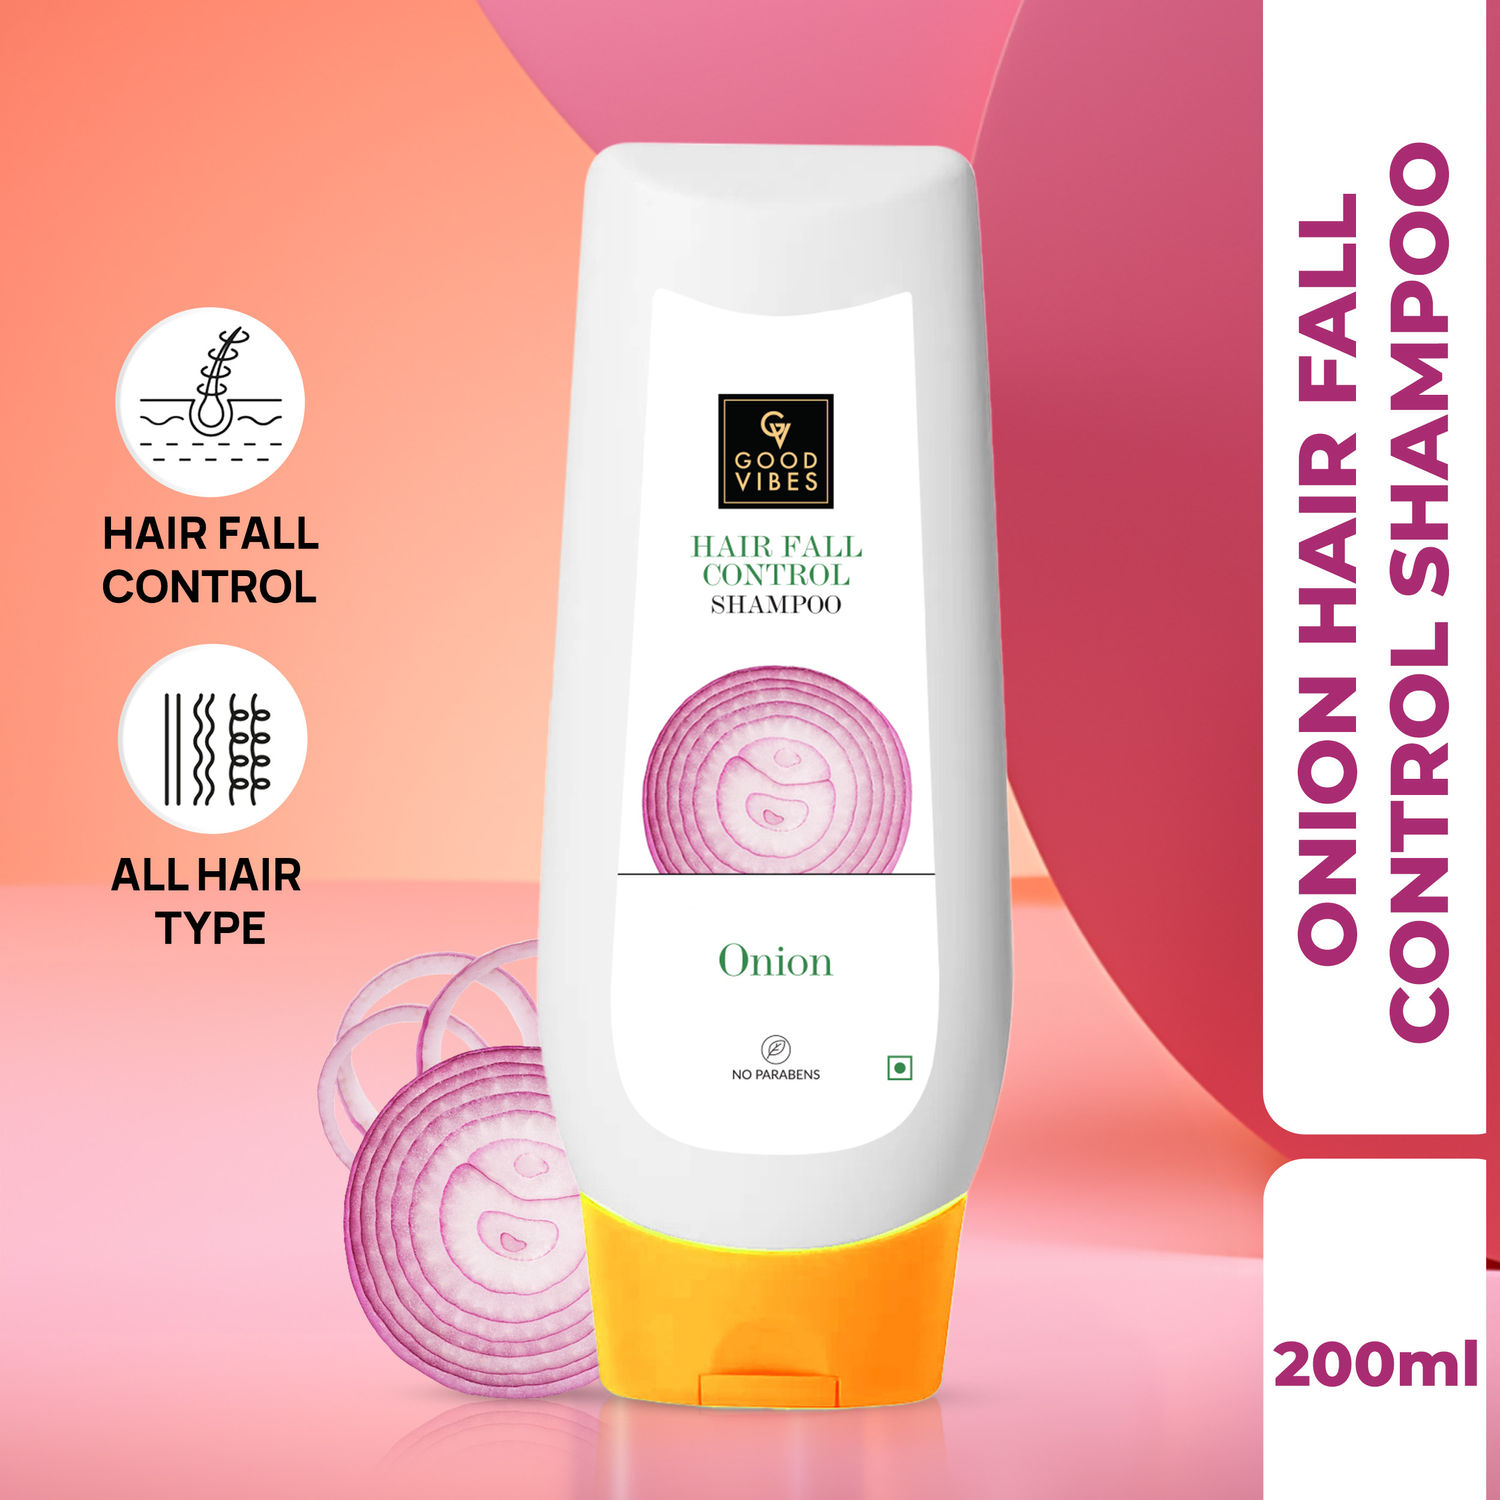 Buy Good Vibes Onion Hairfall Control Shampoo With Keratin, Corn, Wheat Protein & Soy | Strengthening | No Parabens, No Animal Testing (200 ml) - Purplle